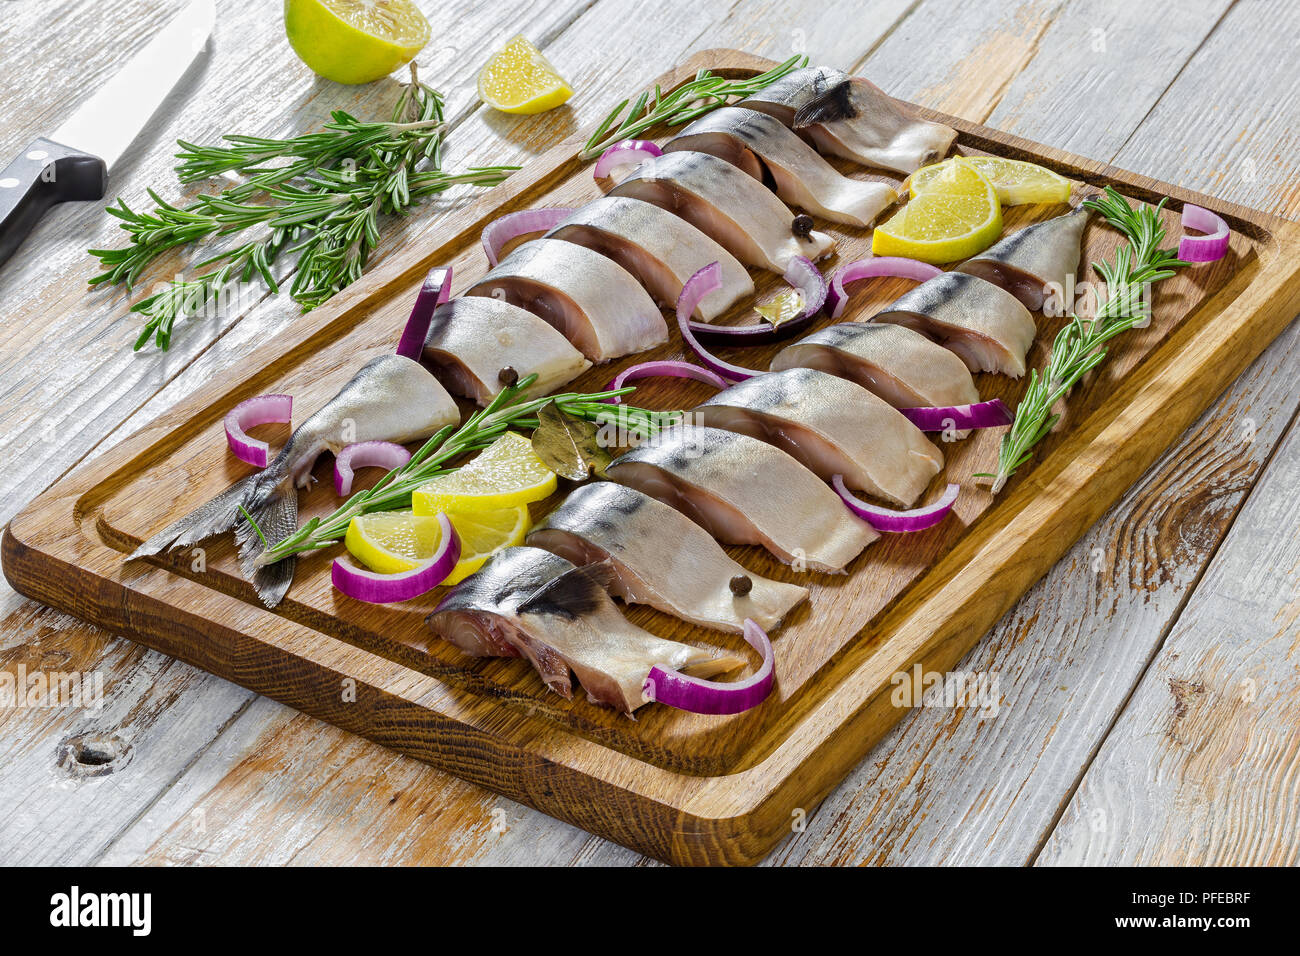 marinated Fillets of Fresh atlantic mackerel fish cut in slices on chopping board with rosemary, lemon, red onion and spices, knife and lemon pieces o Stock Photo